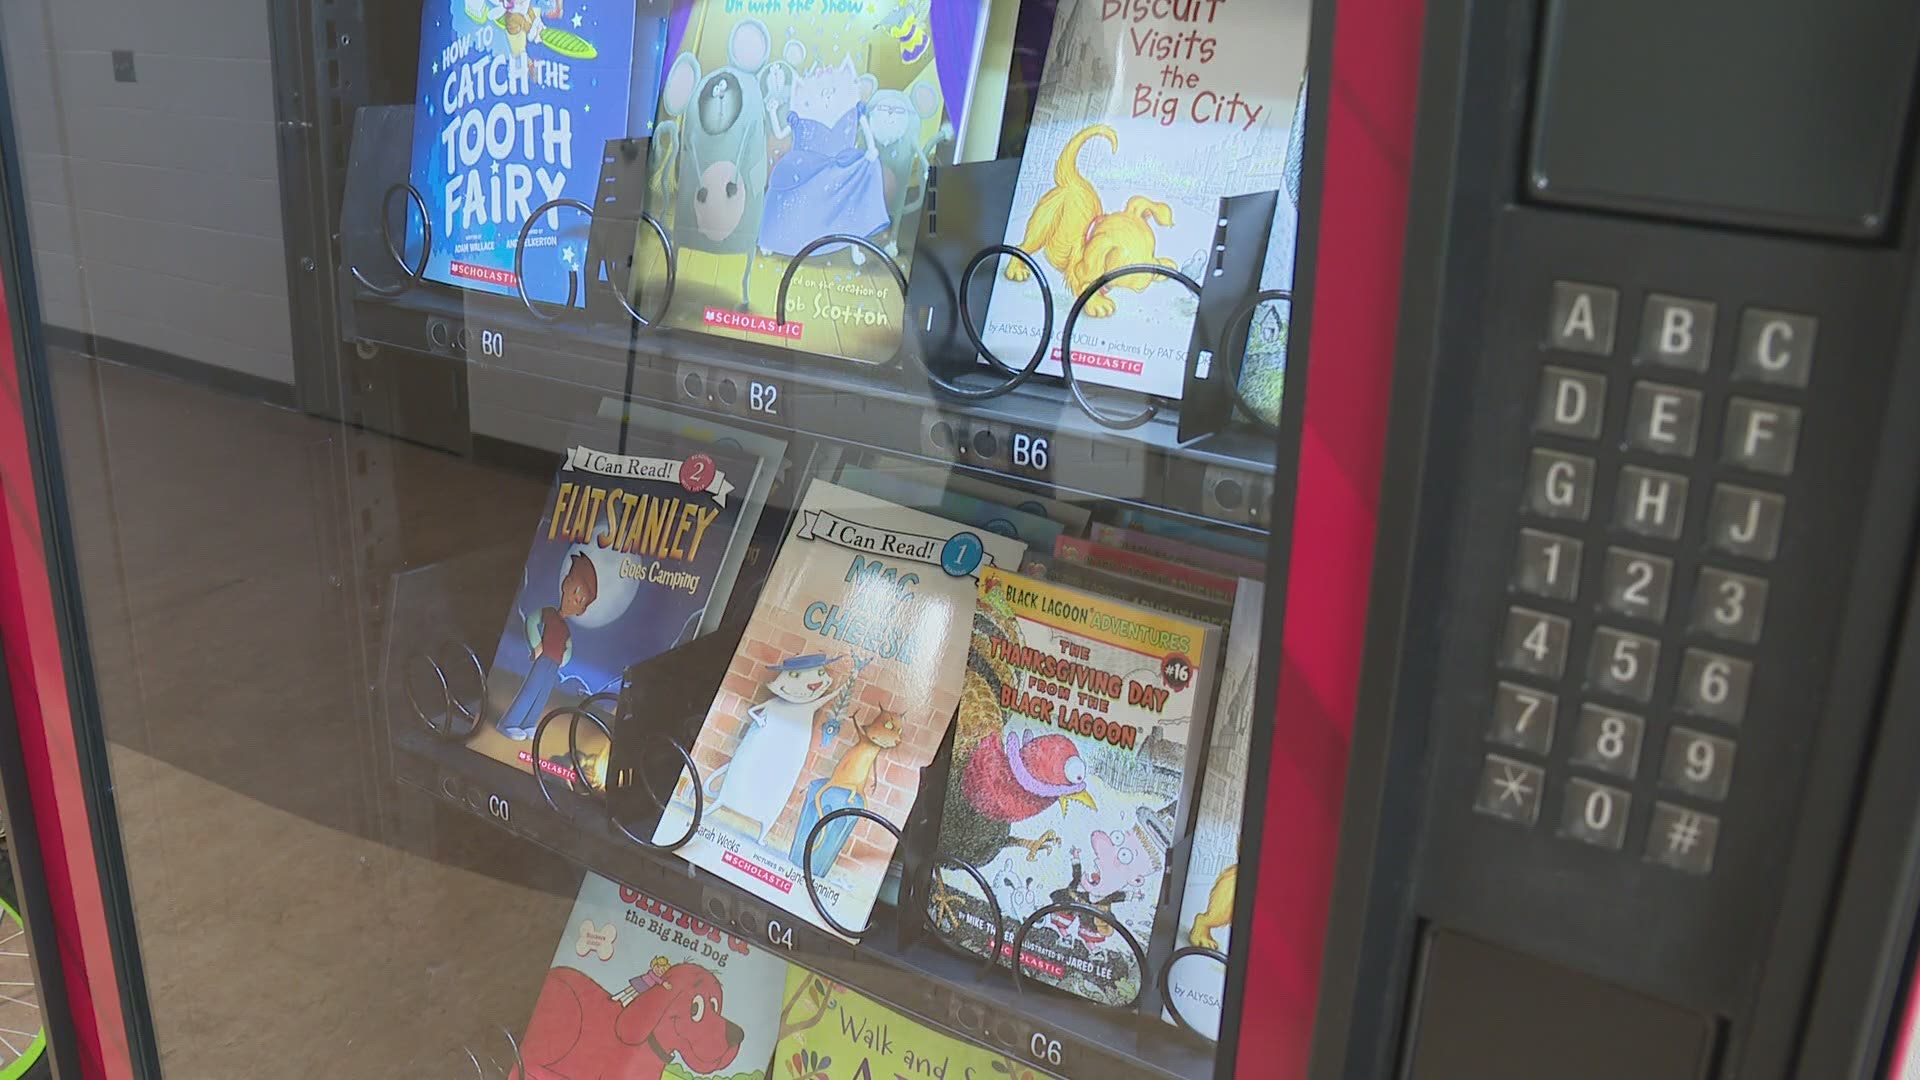 A book vending machine will be operational all school year long, not just during reading month.